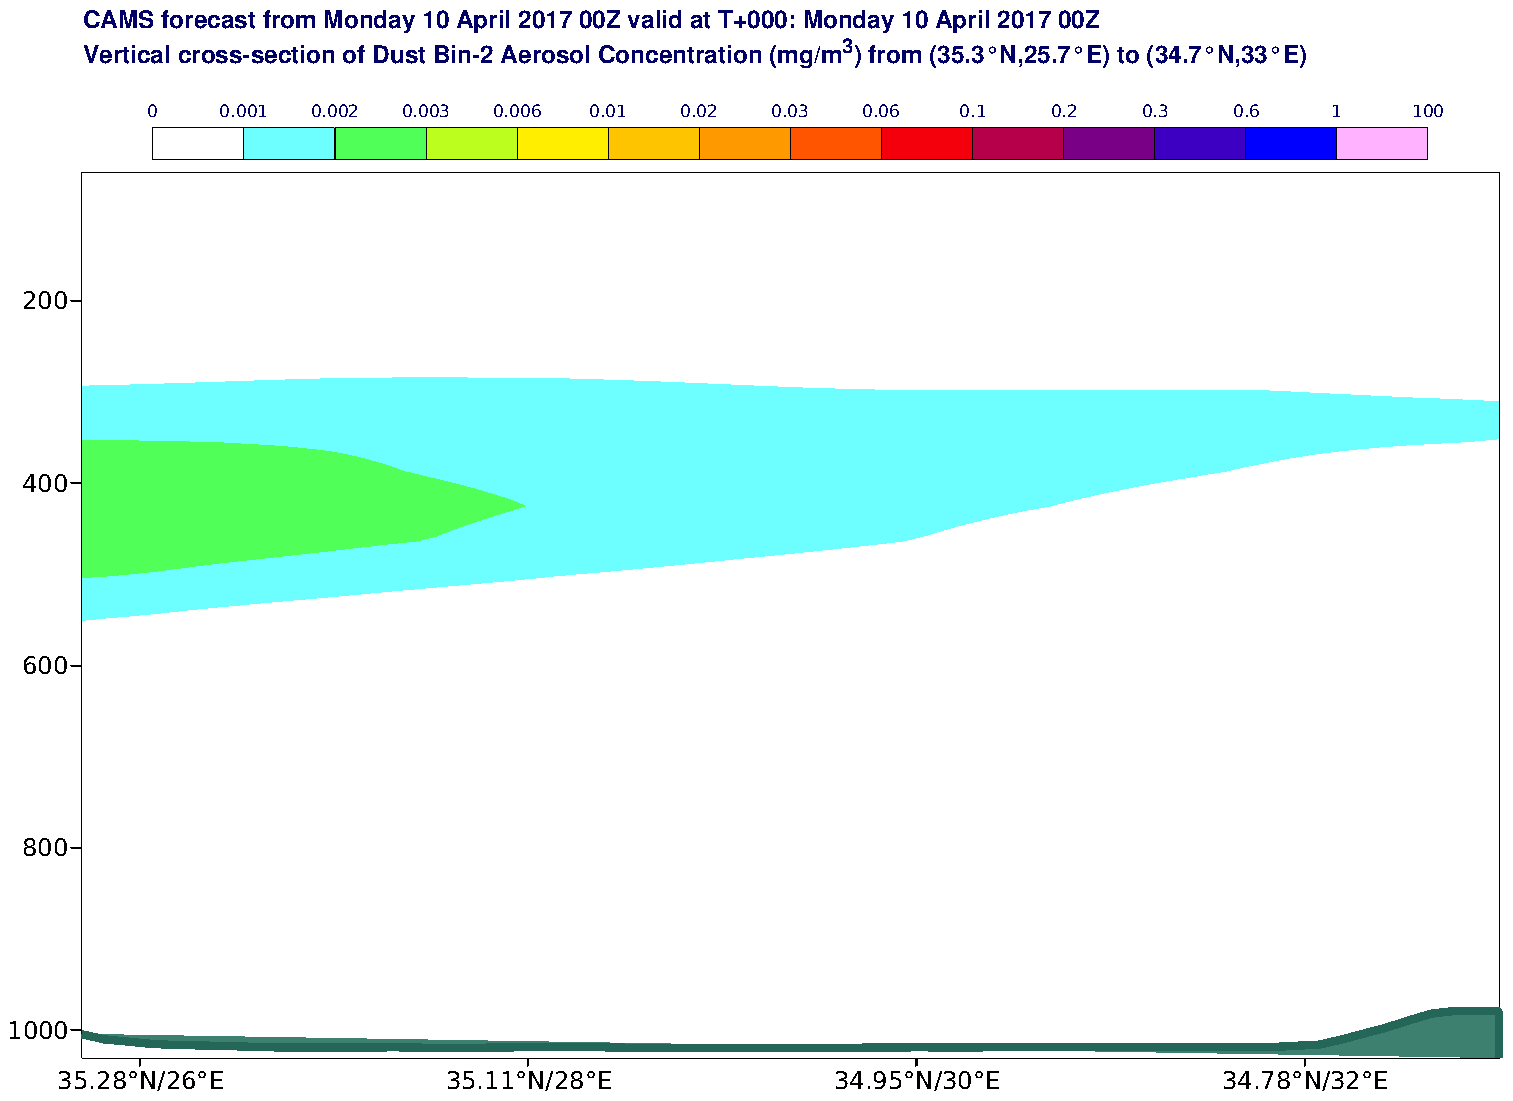 Vertical cross-section of Dust Bin-2 Aerosol Concentration (mg/m3) valid at T0 - 2017-04-10 00:00